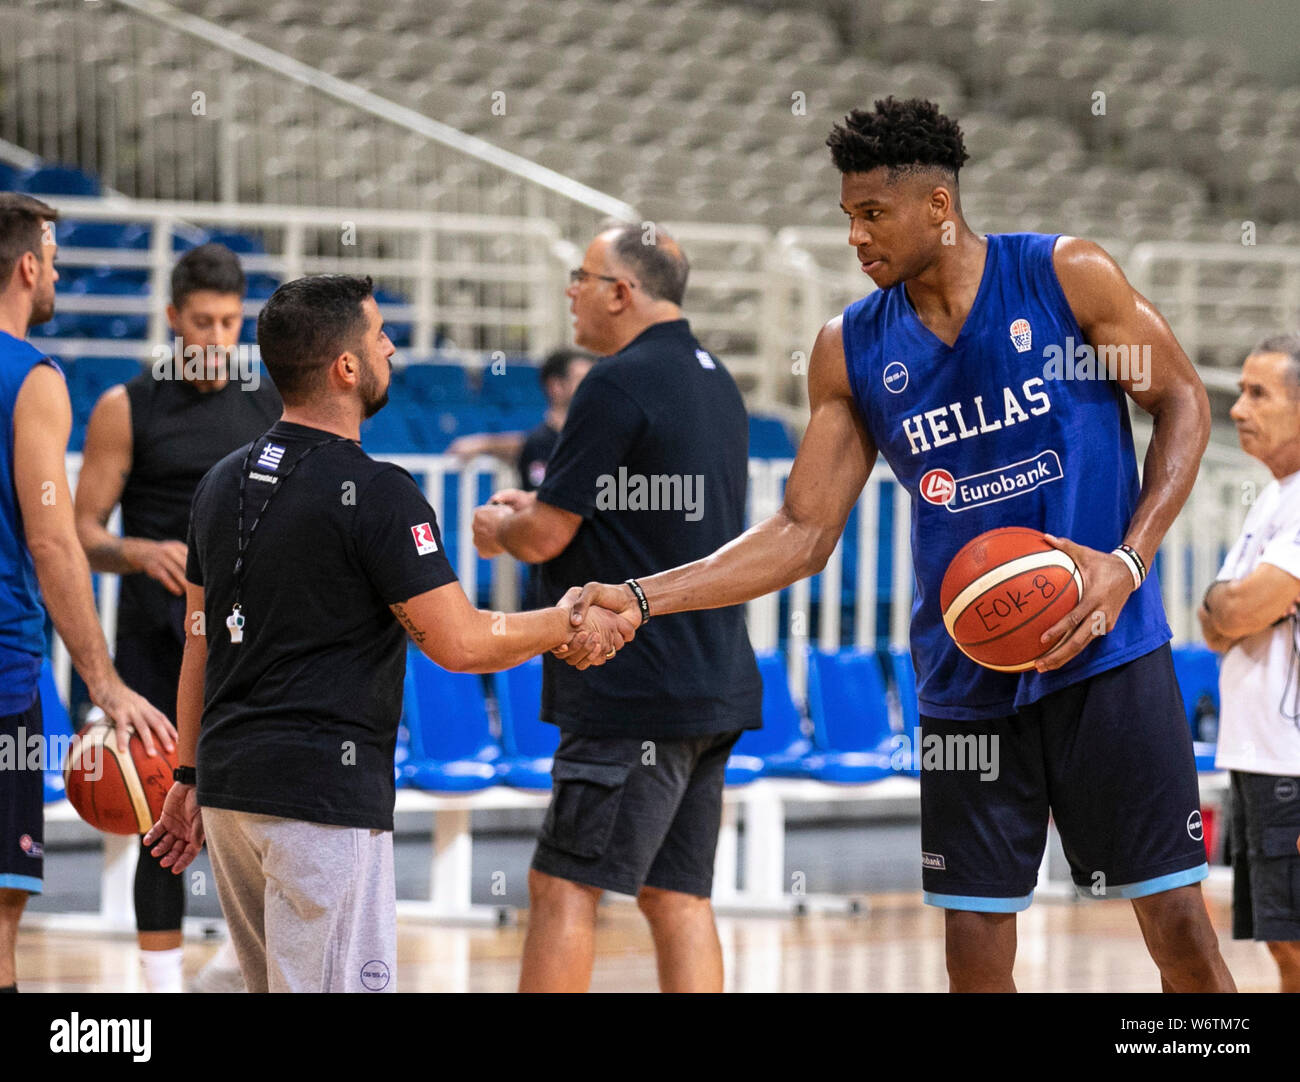 Athens. 2nd Aug, 2019. Greek national basketball team player Giannis  Antetokounmpo (front R) greets a member of the team during a training  session for the upcoming 2019 FIBA World Cup in China